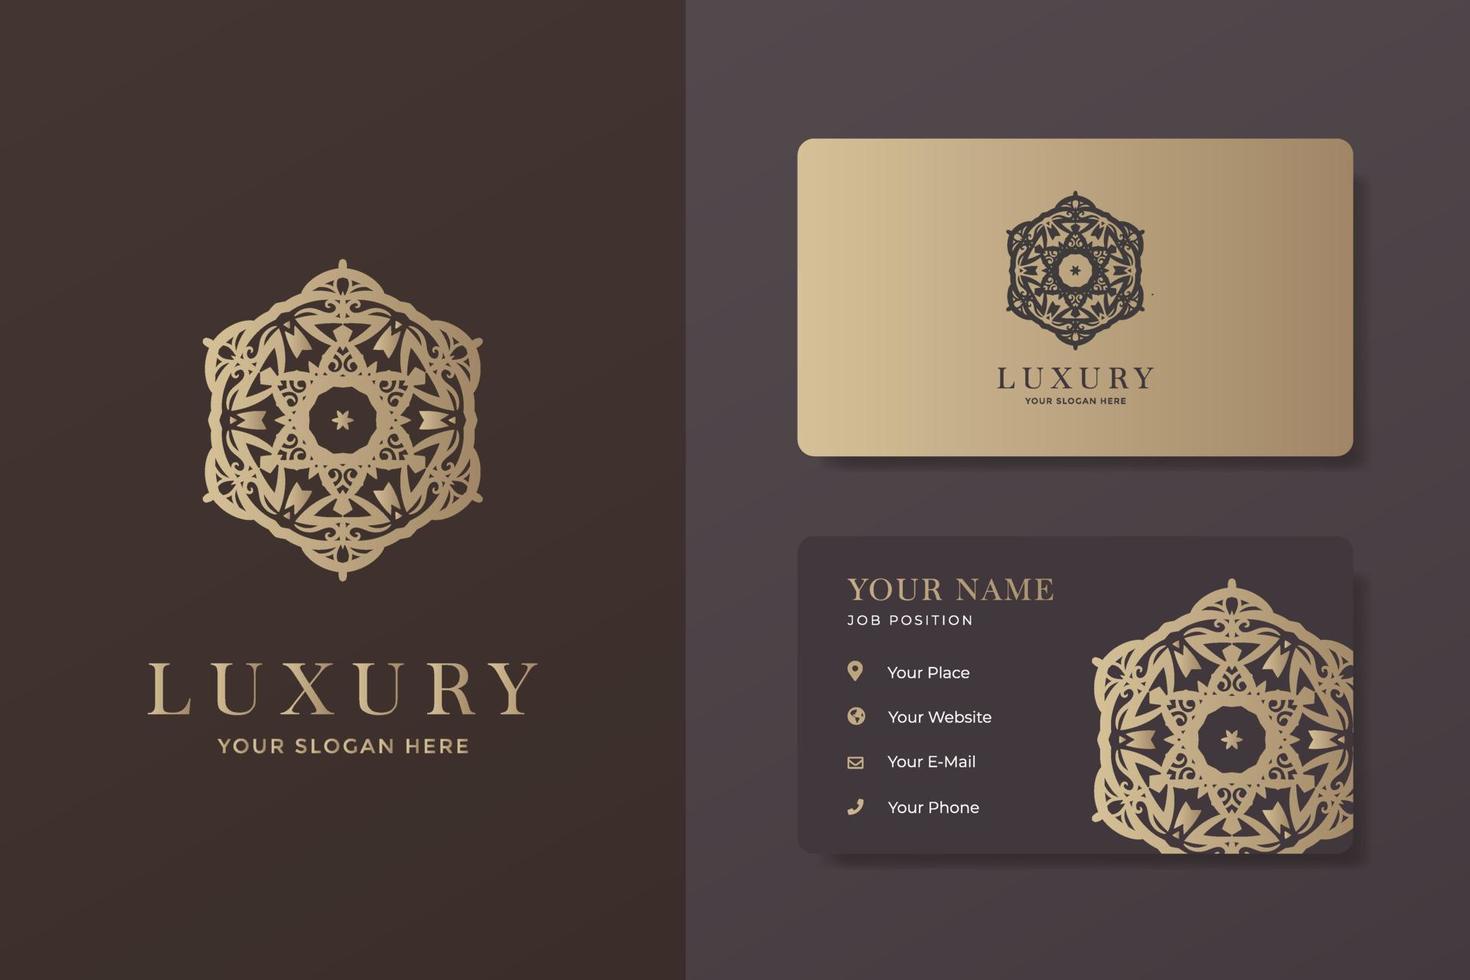 Luxury Logo And Business Card Bundle vector